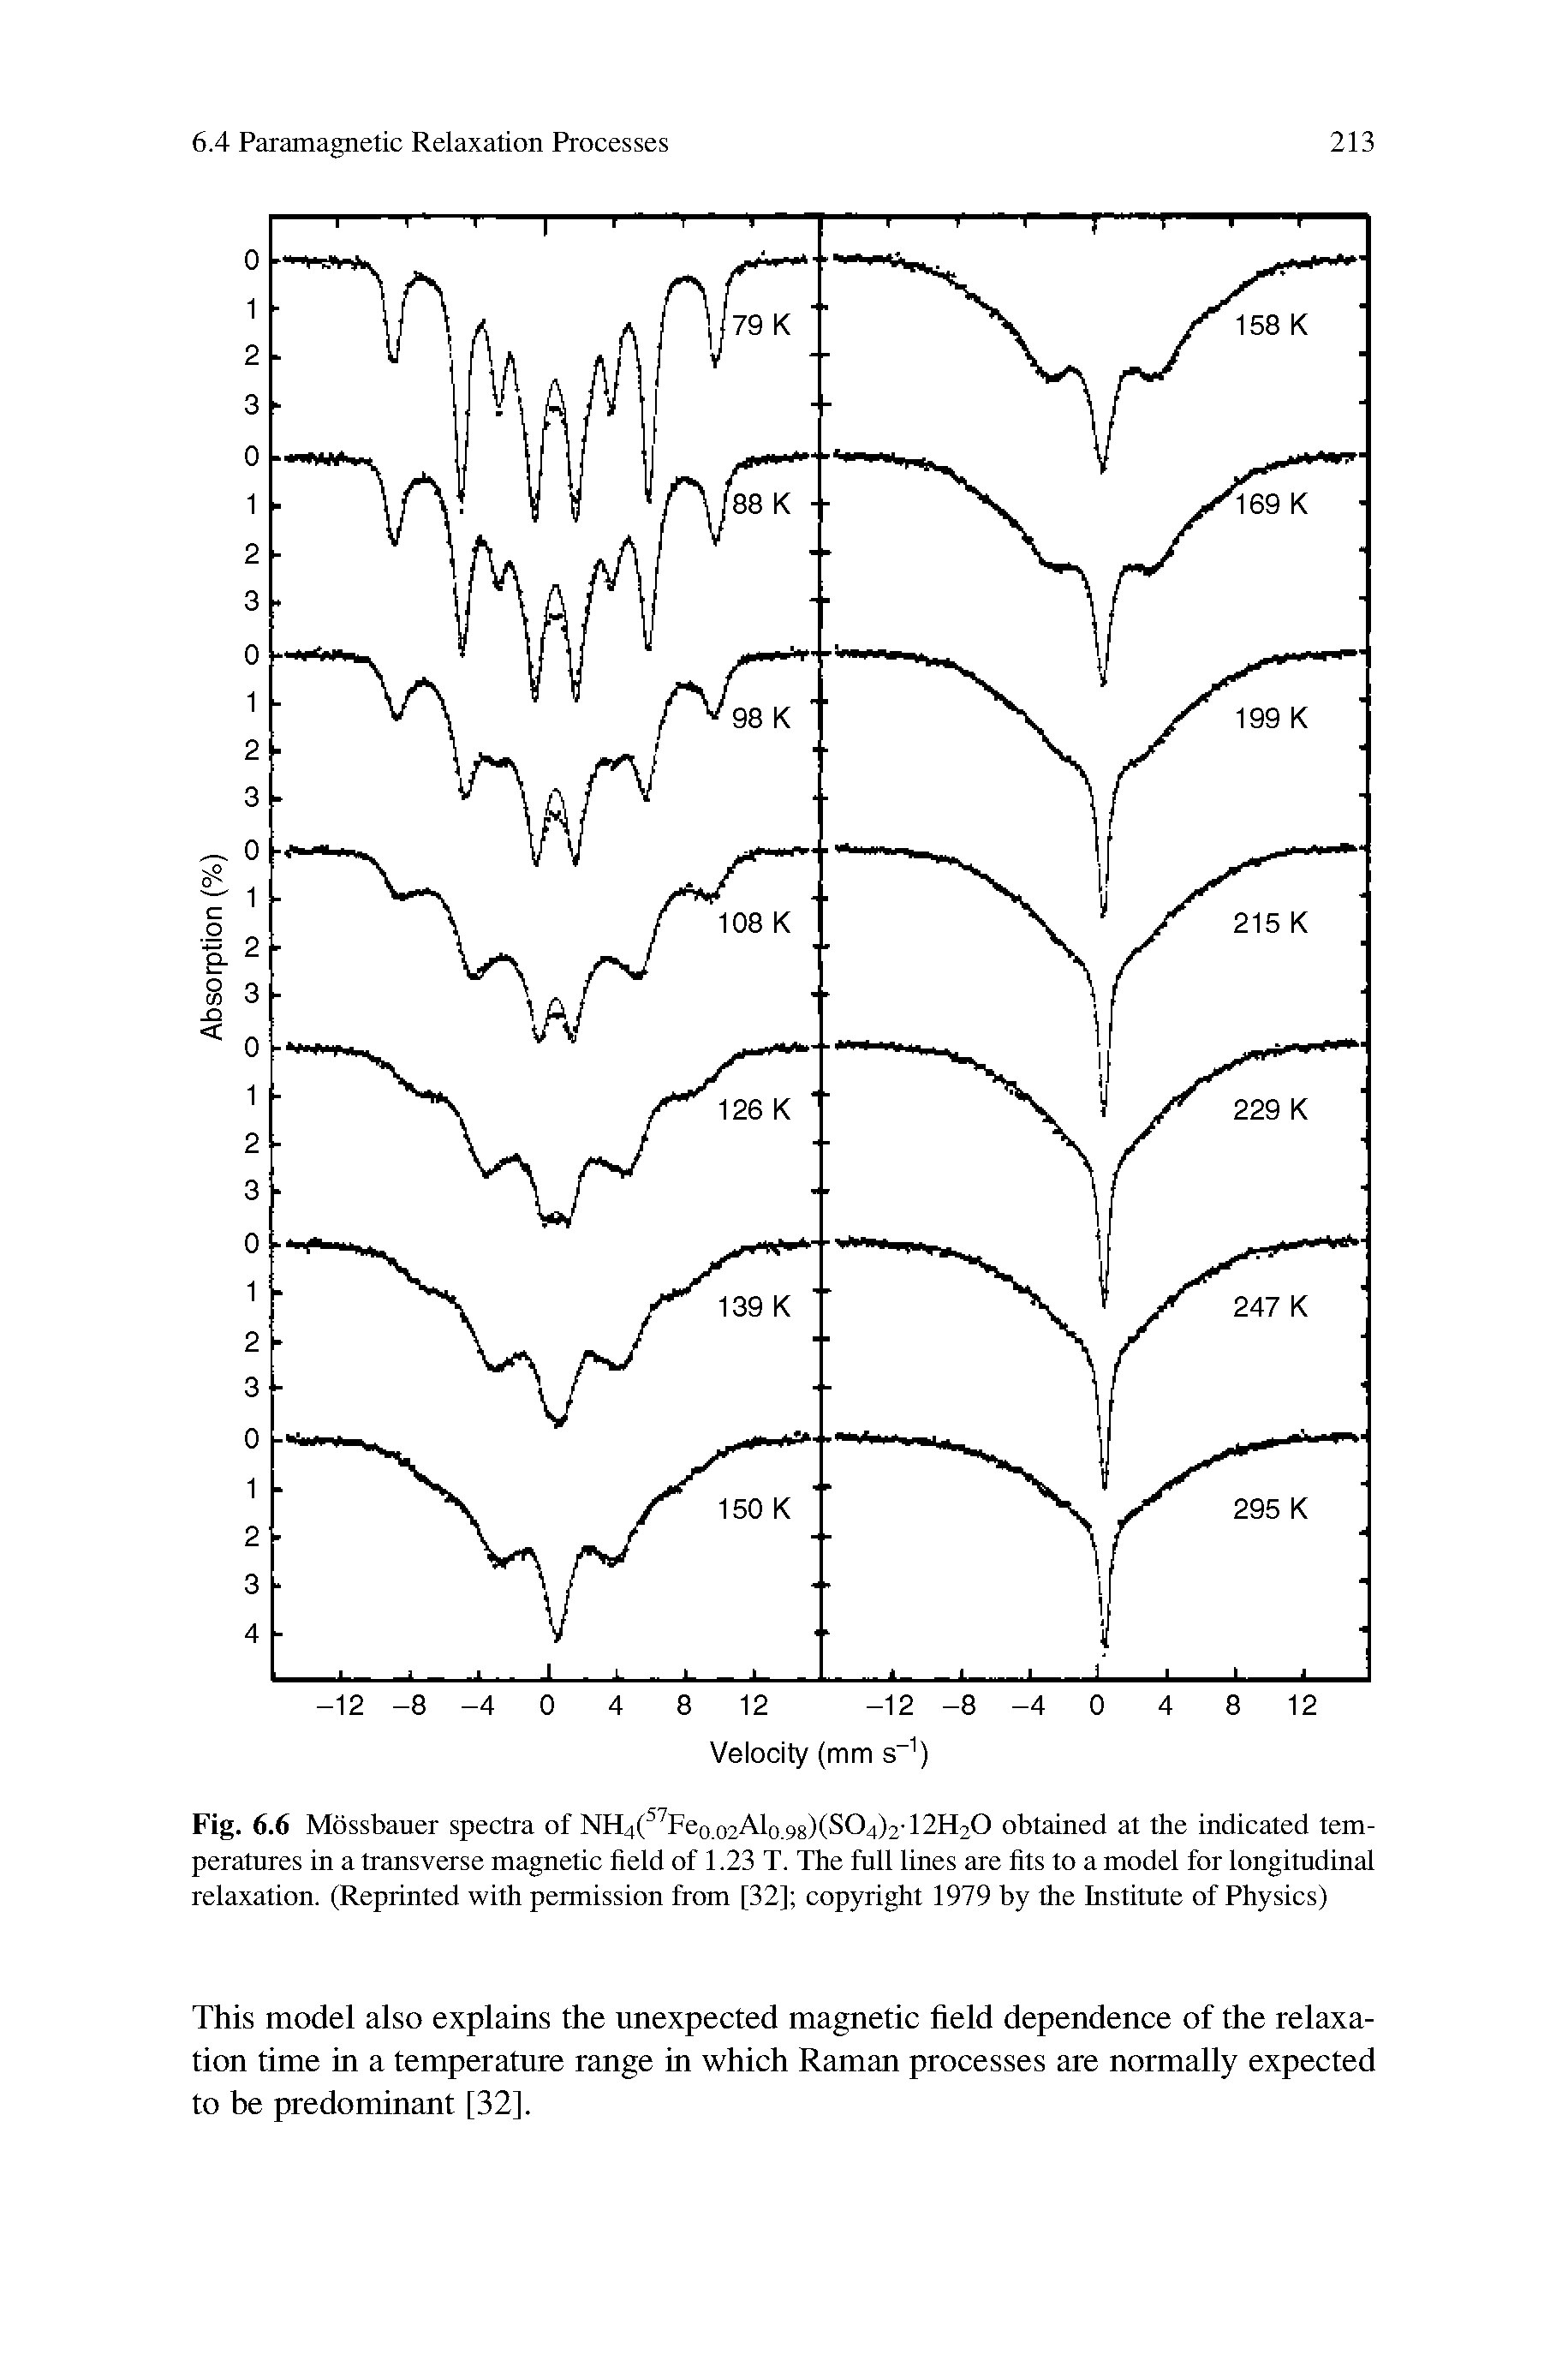 Fig. 6.6 Mossbauer spectra of NH4( Teo.o2Alo.98)(S04)2-12H20 obtained at the indicated temperatures in a transverse magnetic field of 1.23 T. The full lines are fits to a model for longitudinal relaxation. (Reprinted with permission from [32] copyright 1979 by the Institute of Physics)...